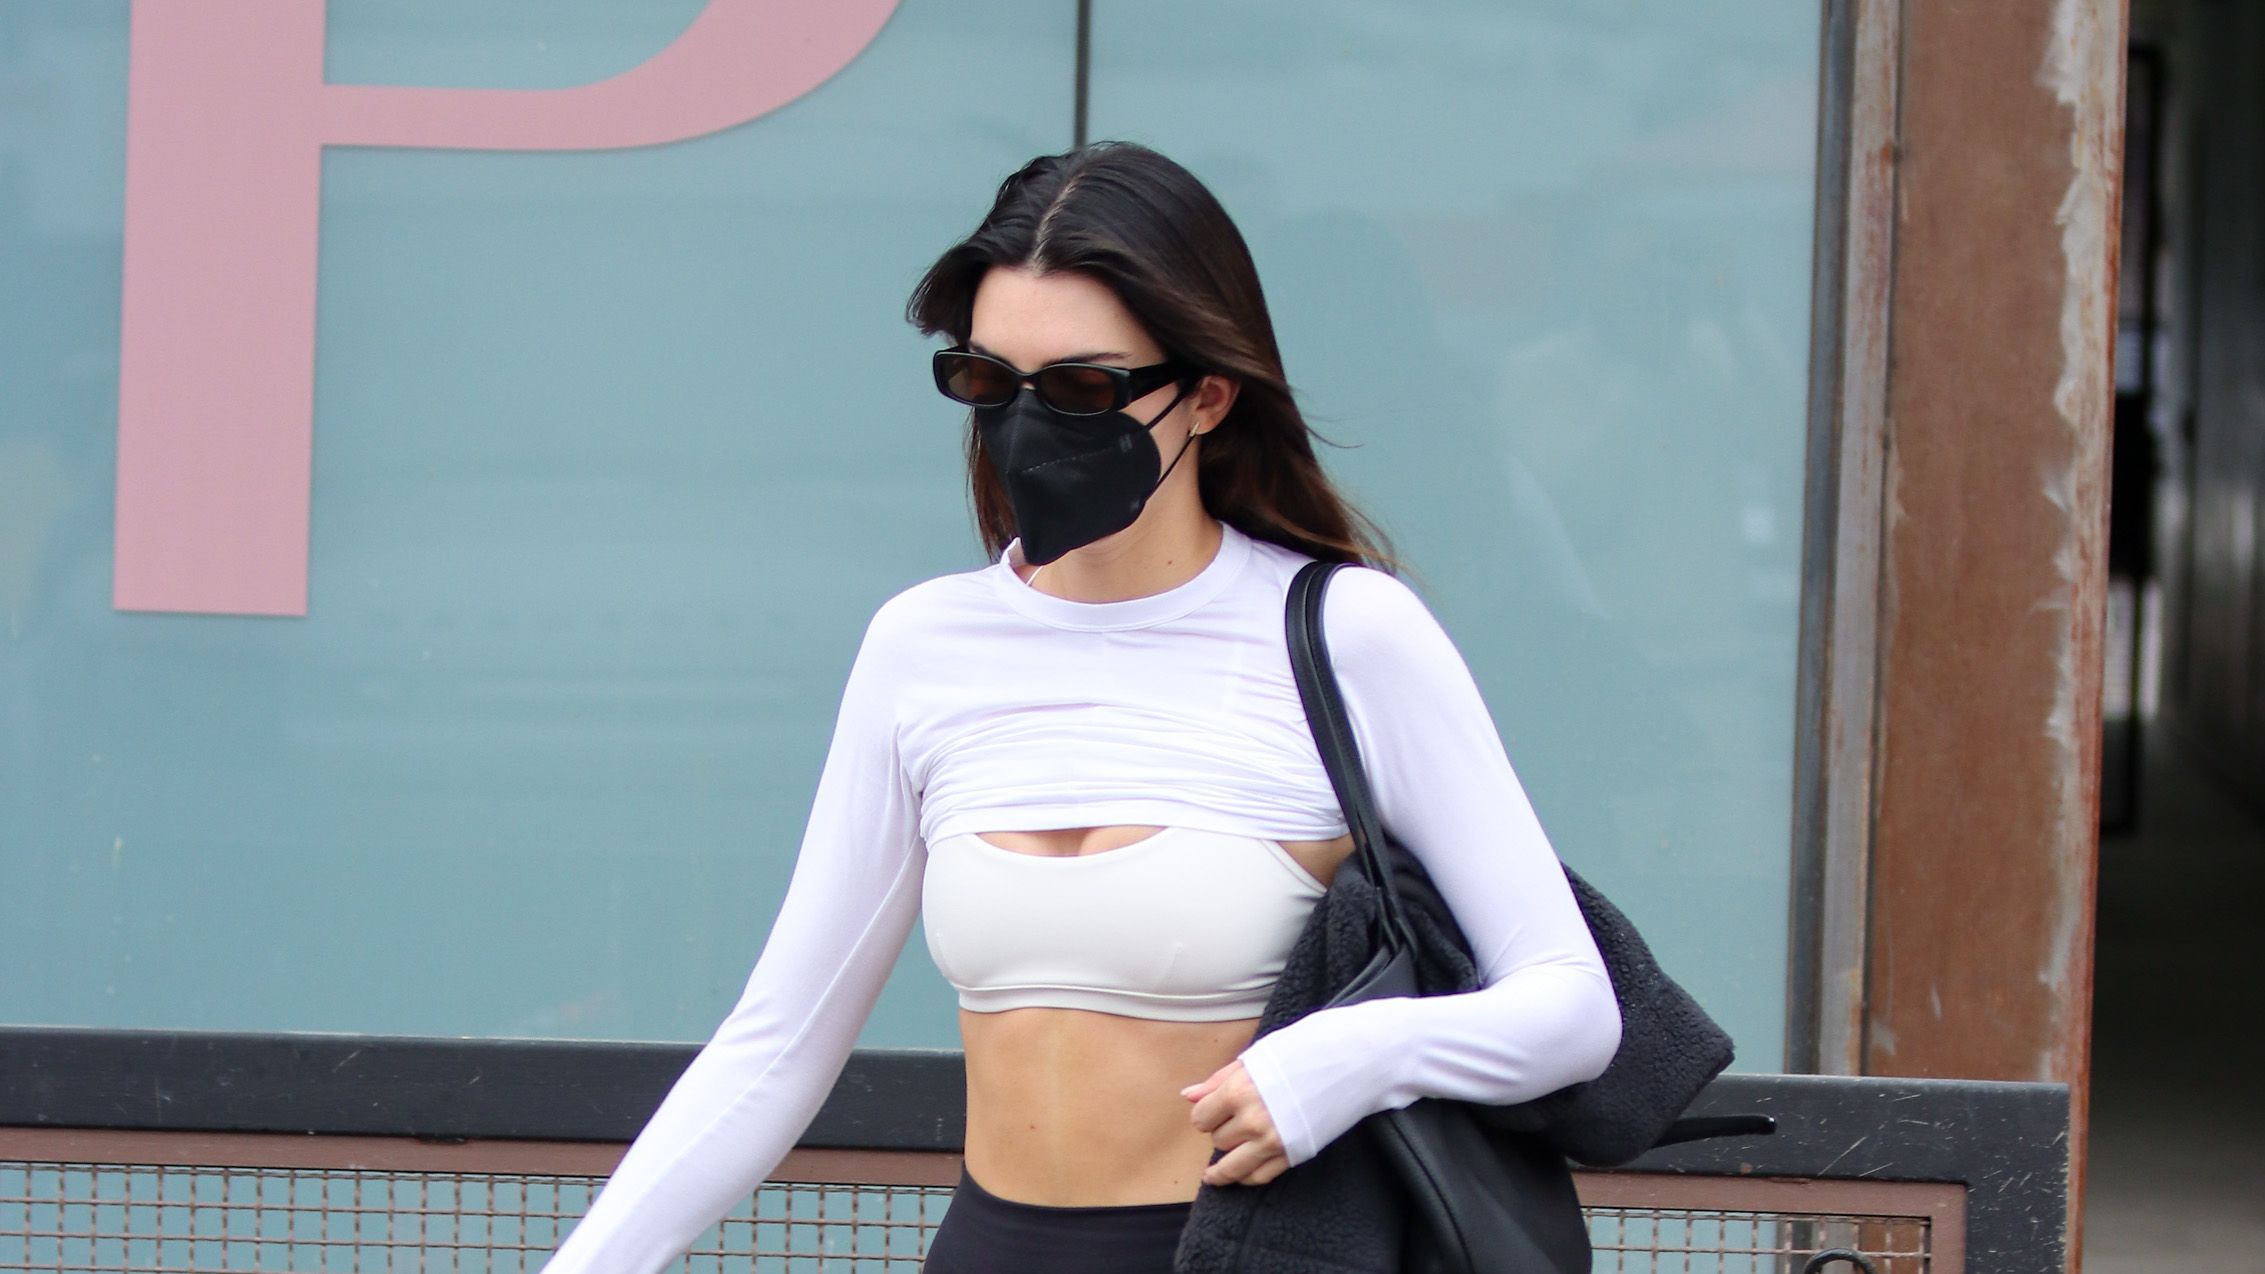 These celebs' crop tops are basically just sports bras